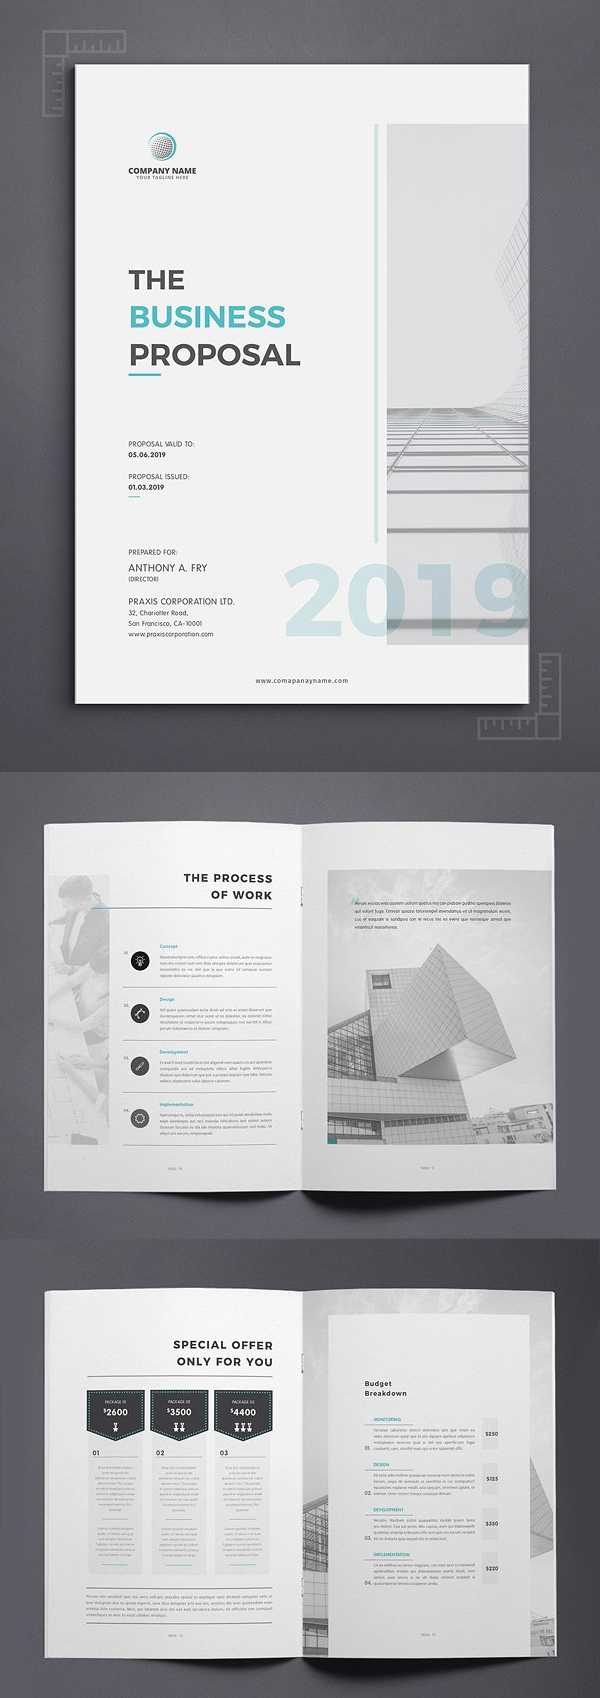 Business Proposal Templates | Design | Graphic Design Junction With Regard To Free Business Proposal Template Ms Word